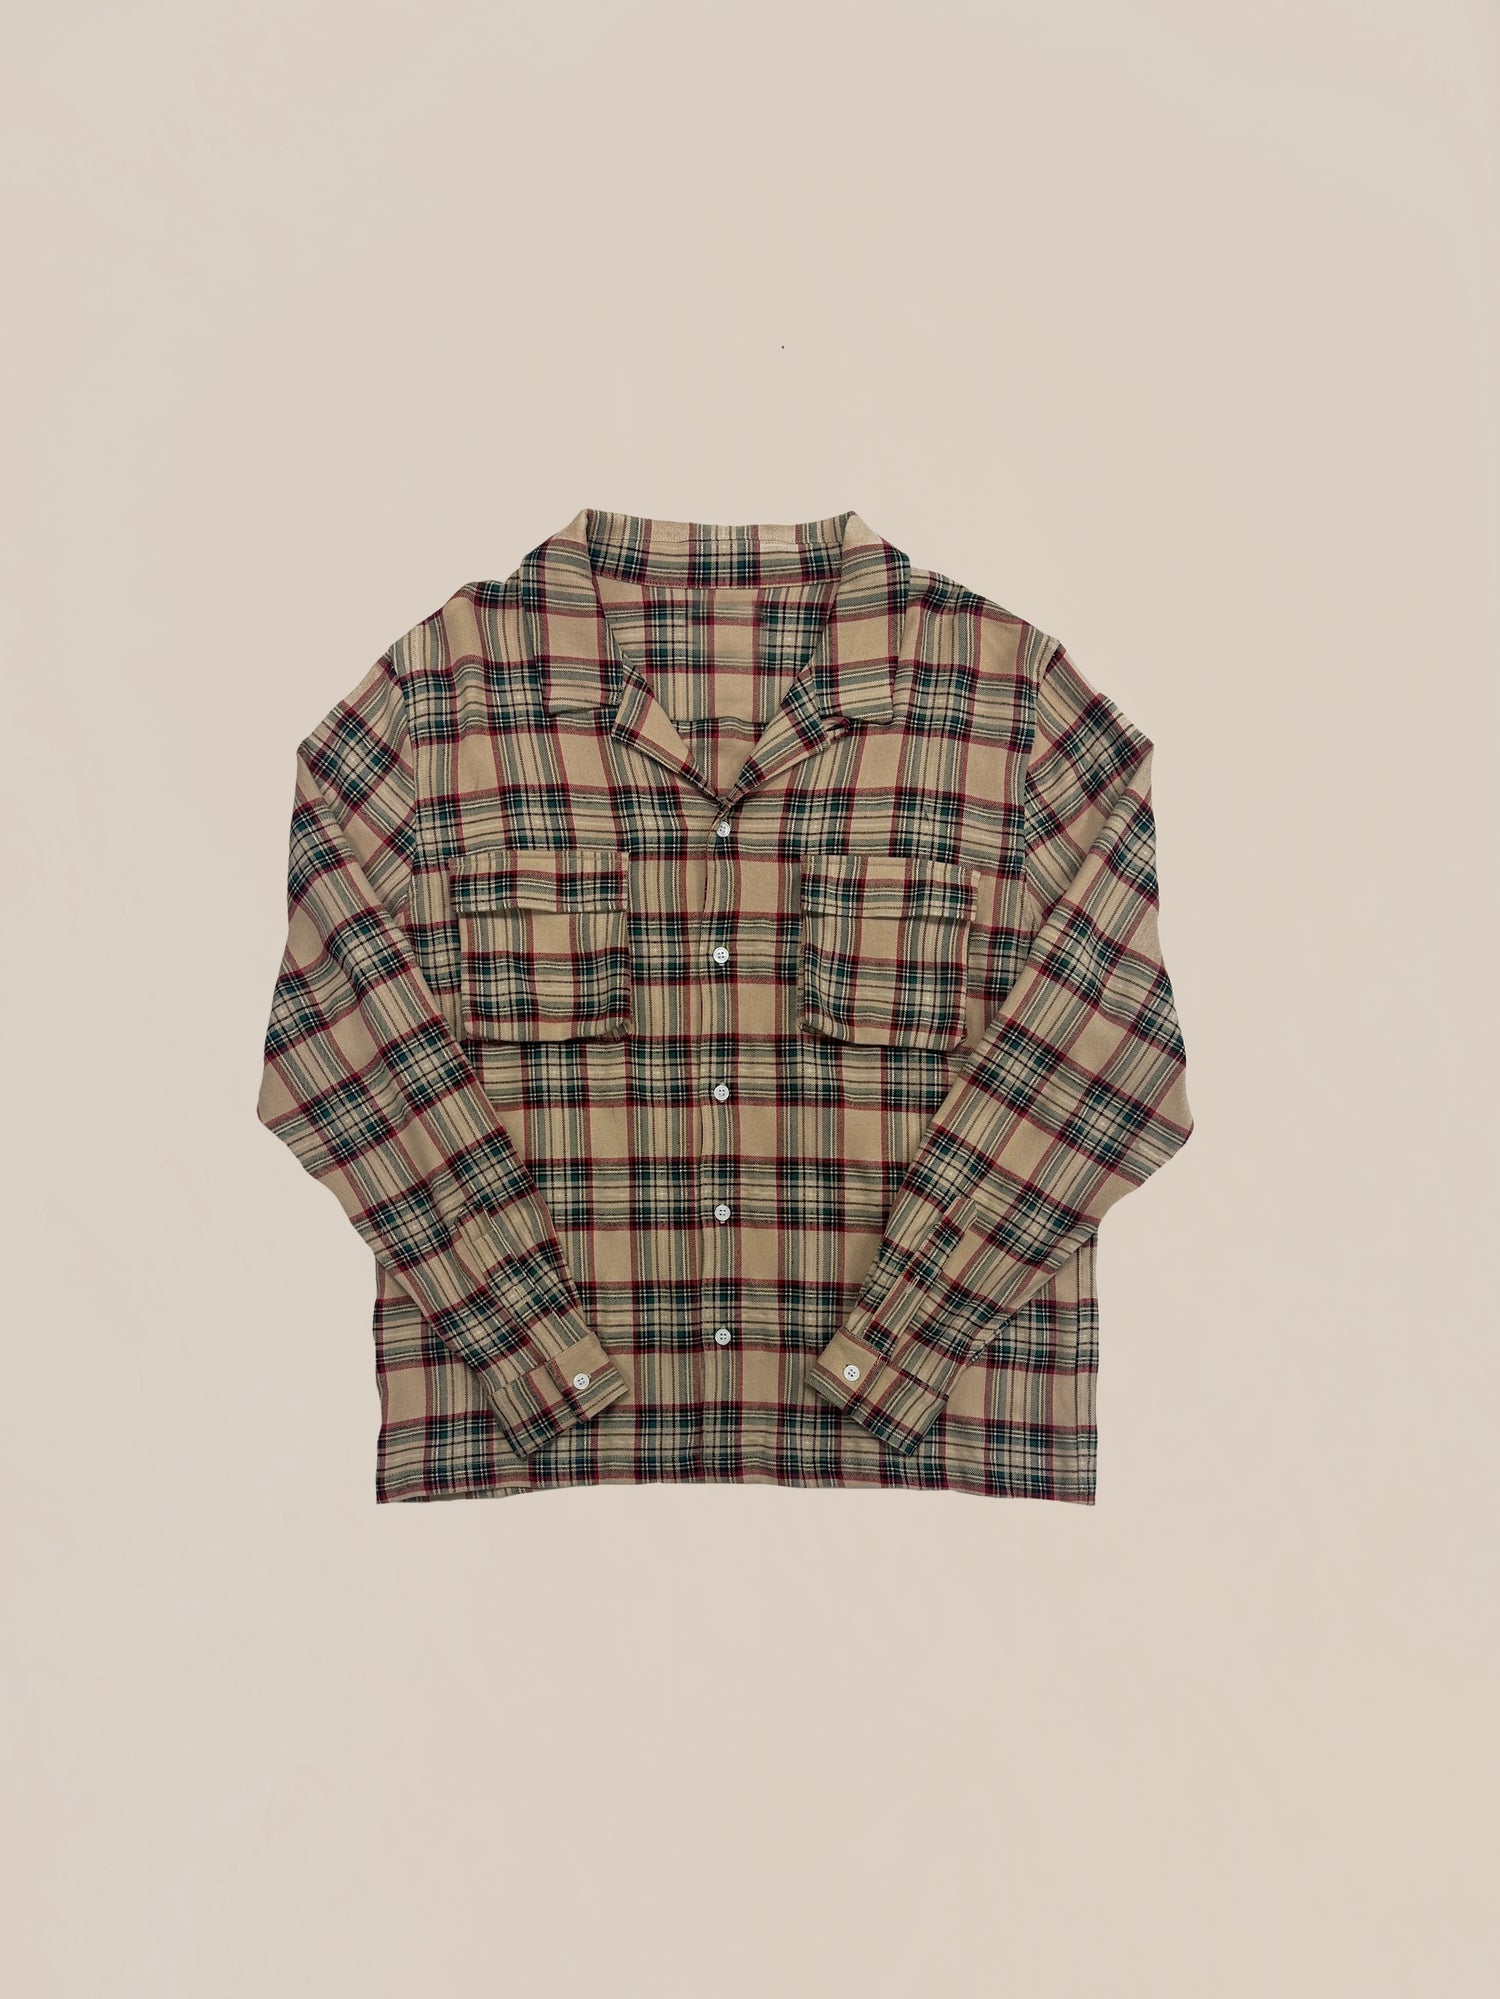 Sample 71 (Beige Multi Flannel Button Down) shirt by Profound laid out flat on a light background.